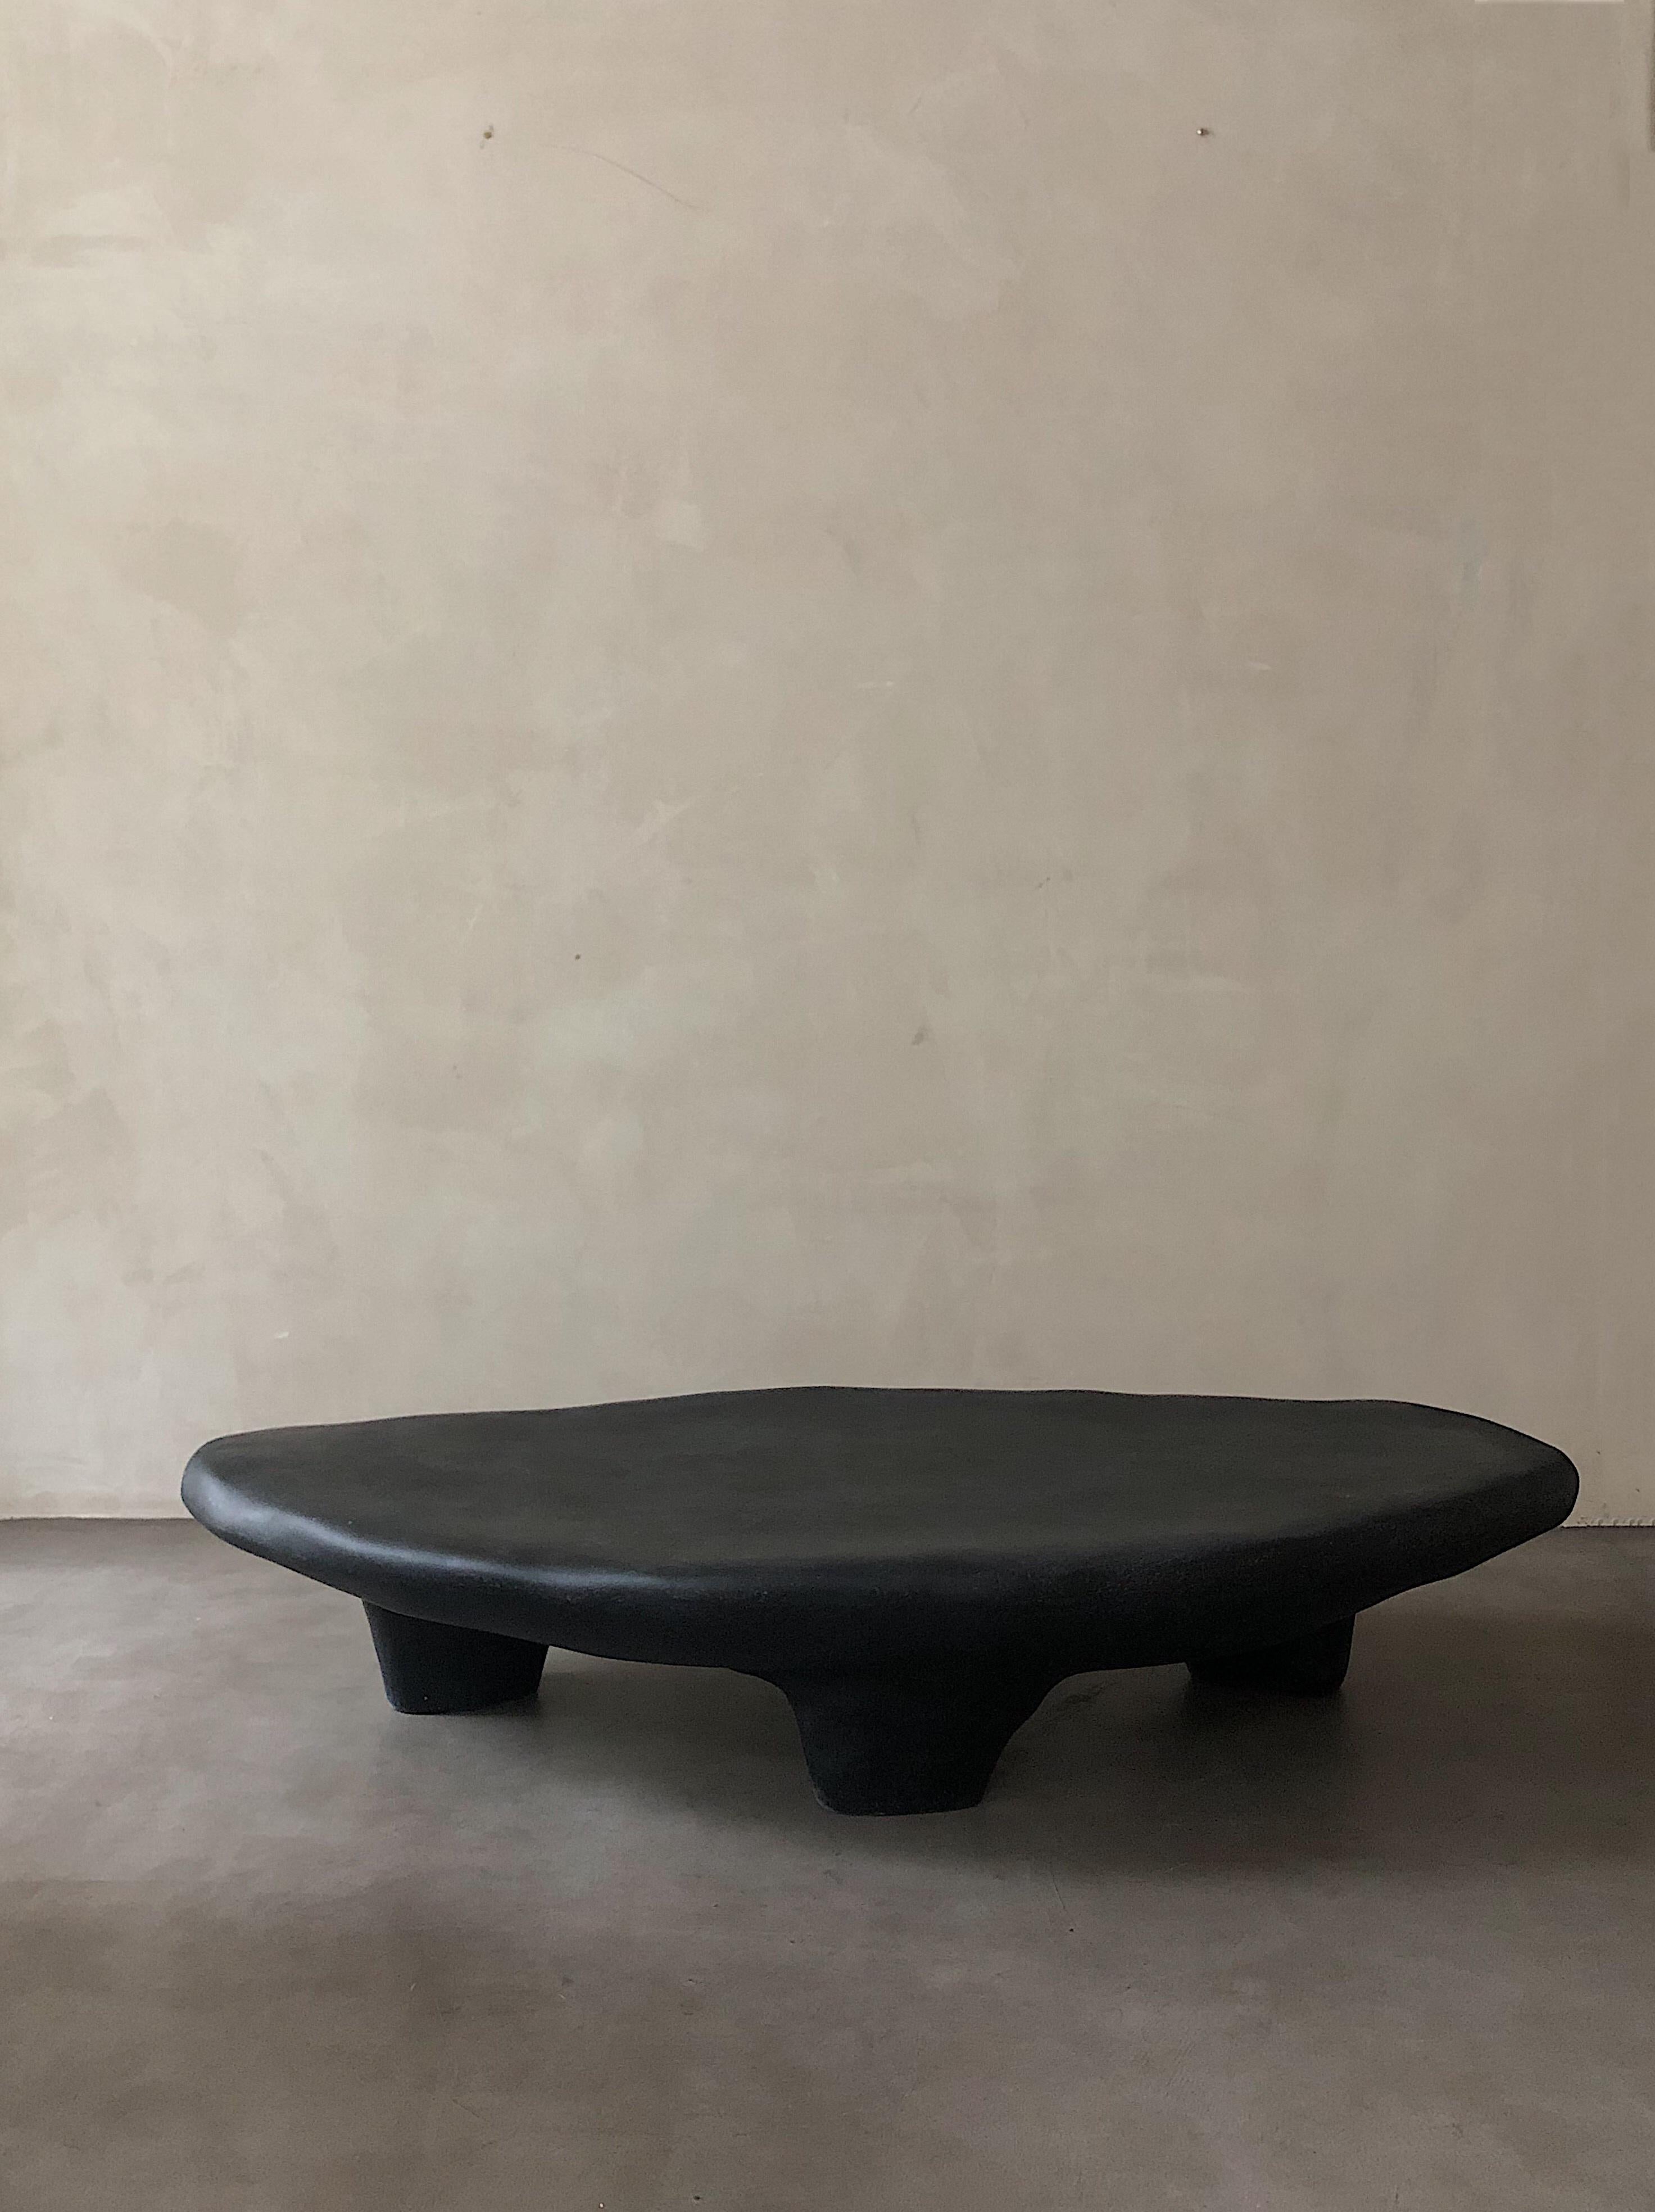 Black Tripod Coffee Table by kars
Materials: FRP.
Dimensions: 150 x 85 x 30 cm.
*This piece is suitable for outdoor use.

Inspired by three-leg utensils, which were the first creation of human beings in ancient times. The triangle structure and the